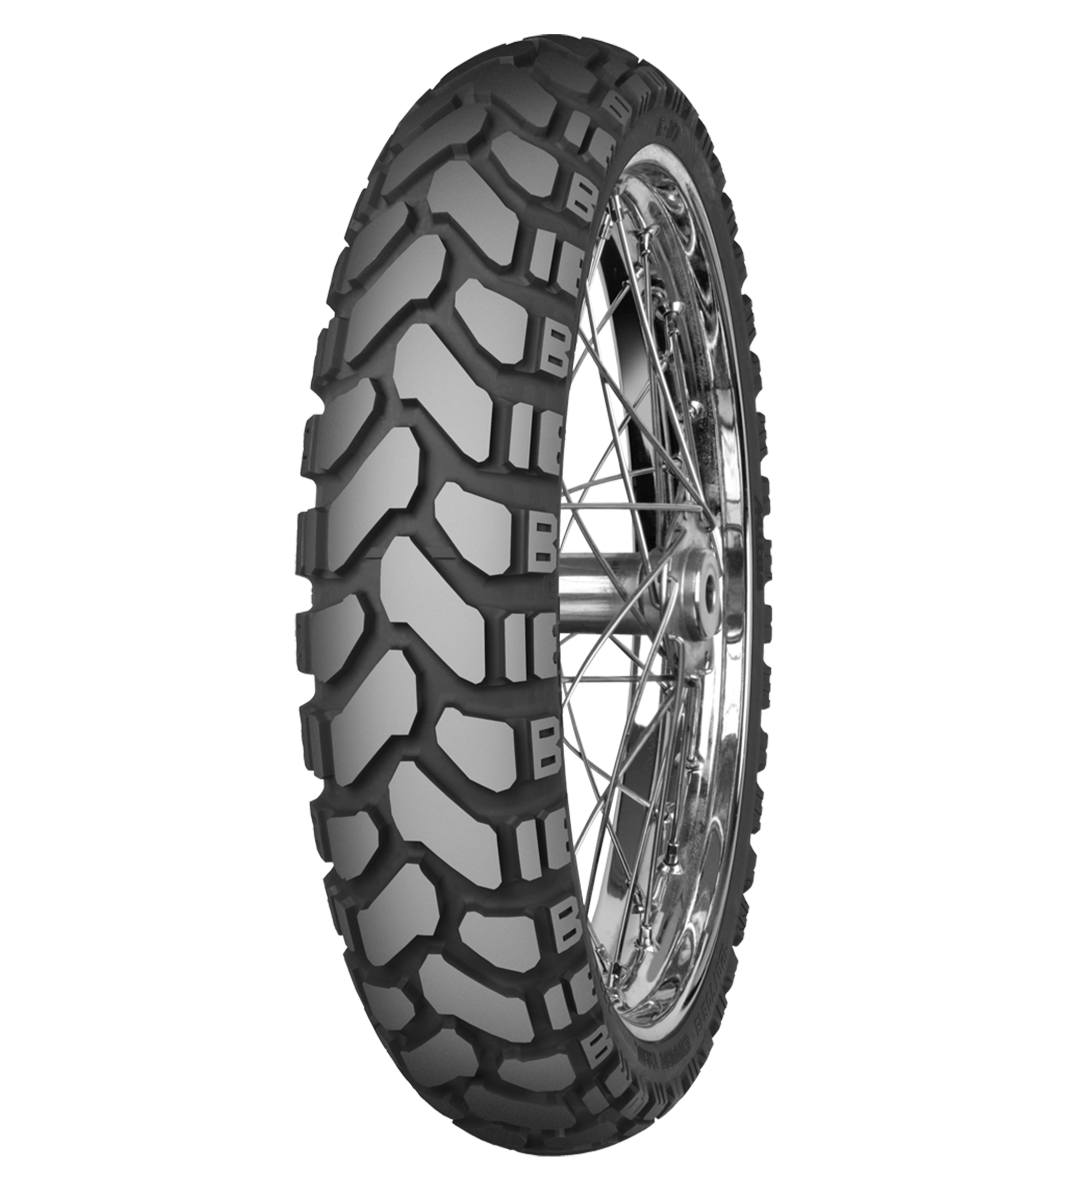 Mitas E-07+ ENDURO TRAIL 120/70B19 Trail ON Trail 60T No Stripe Tubeless Front Tire, 224143, 120/70B19, Adventure Touring, E Series, E-07+ Enduro Trail, Front, Trail, Trail ON, Tires - Imported and distributed in North &amp; South America by Lindeco Genuine Powersports - Premier Powersports Equipment and Accessories for Motorcycle Enthusiasts, Professional Riders and Dealers.